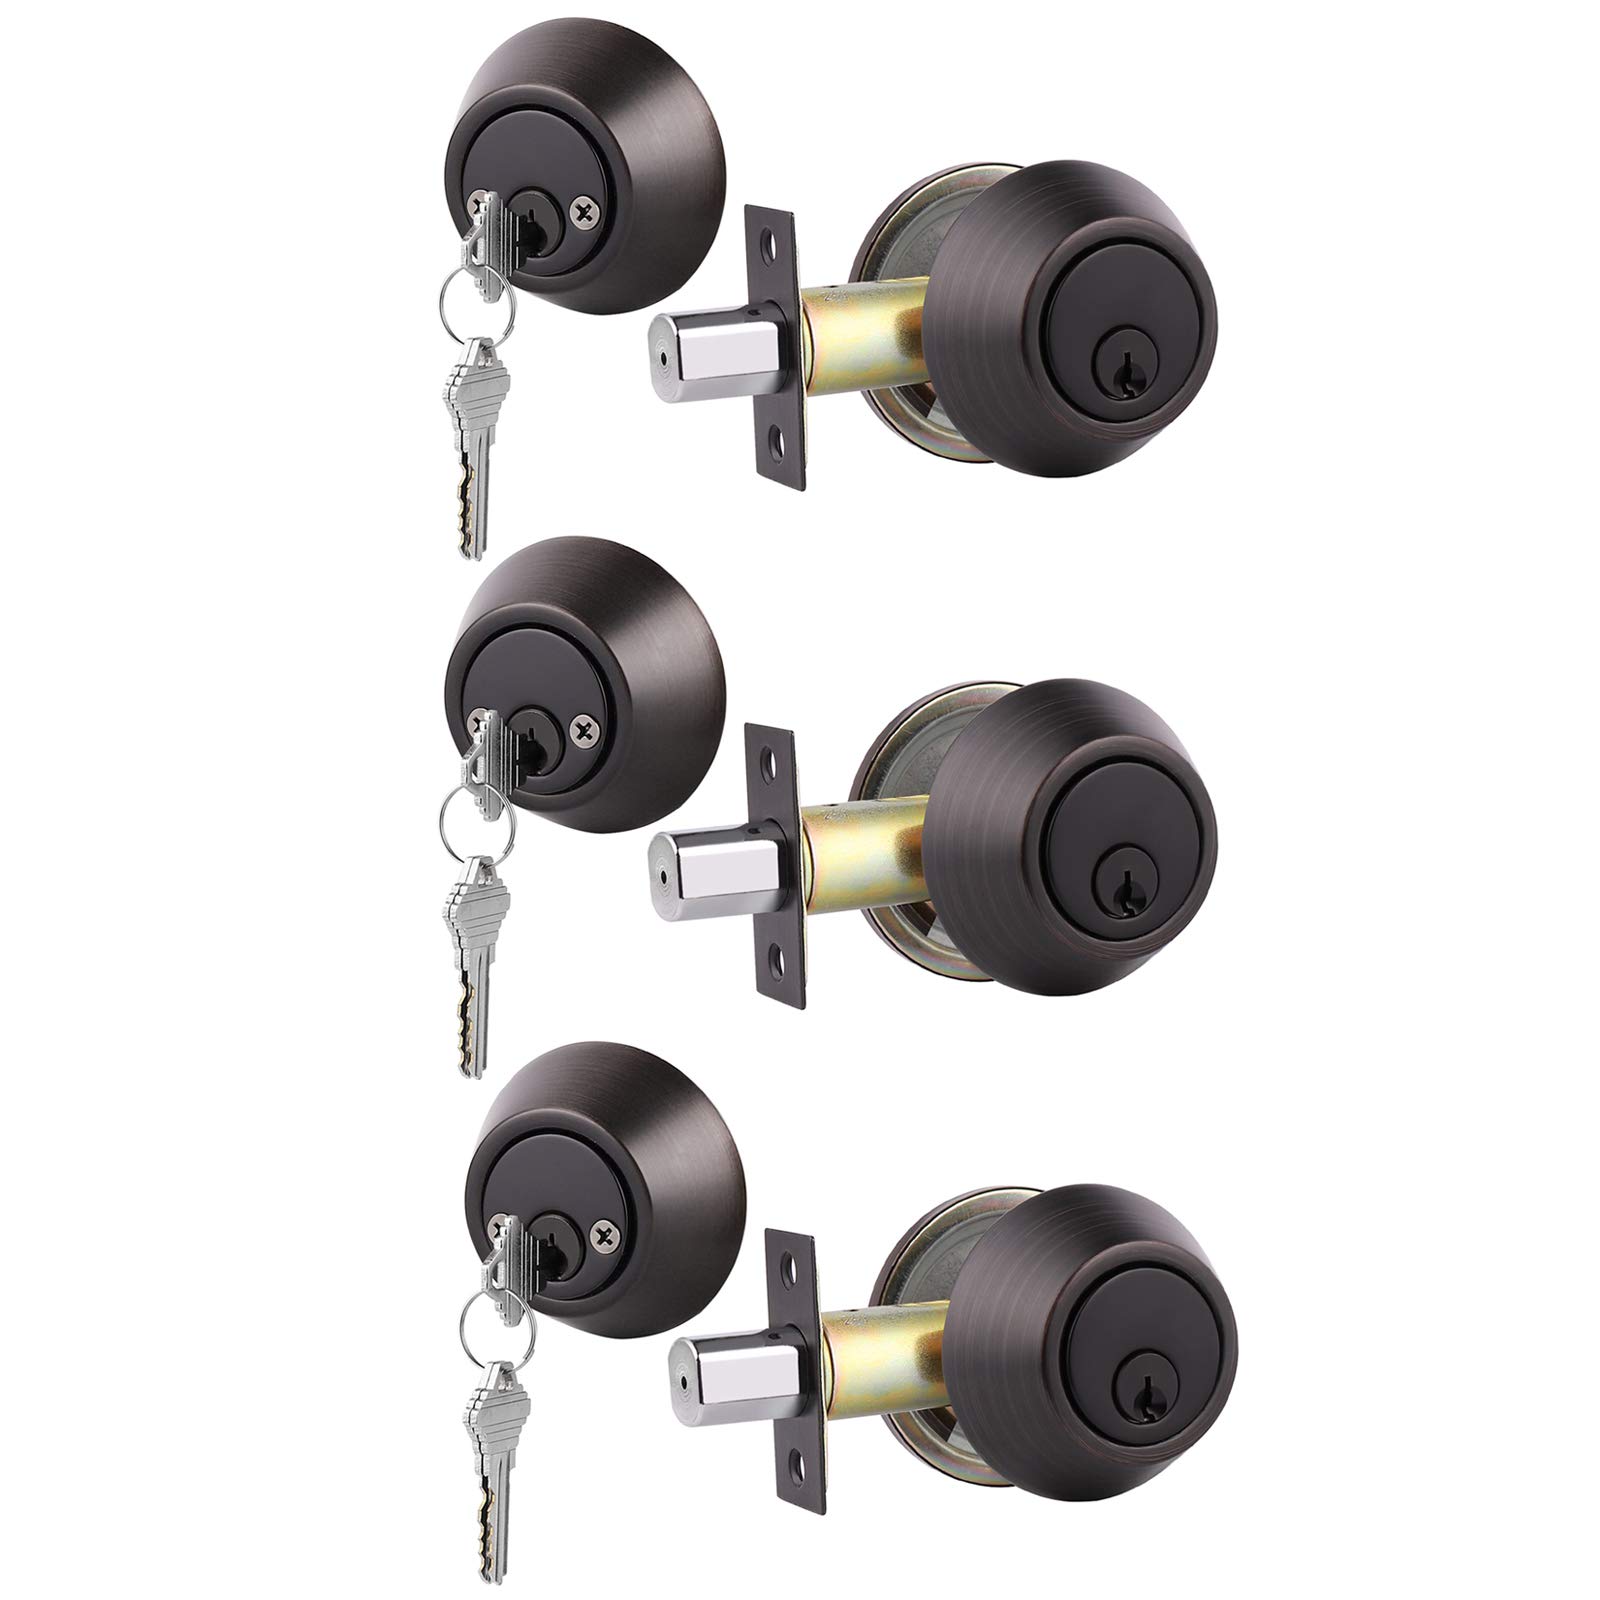 gobrico 3 Keyed Alike Double cylinder Deadbolts, ExteriorInterior Door Deadbolt Locks, Oil Rubbed Bronze Finished, with Same Key